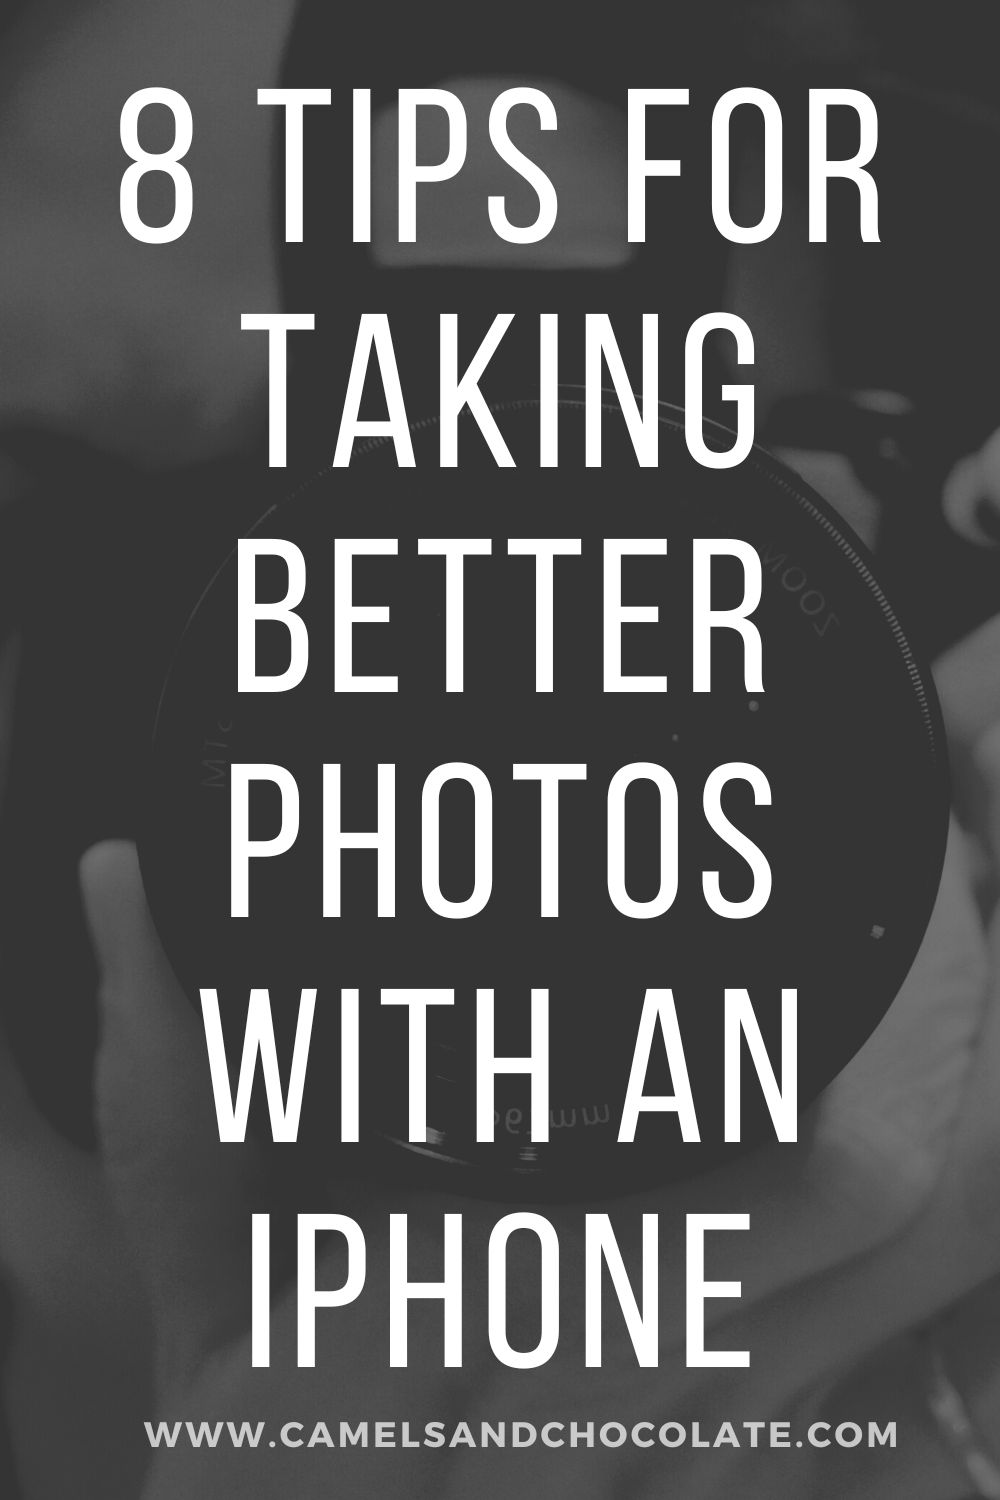 How to take better photos with an iPhone